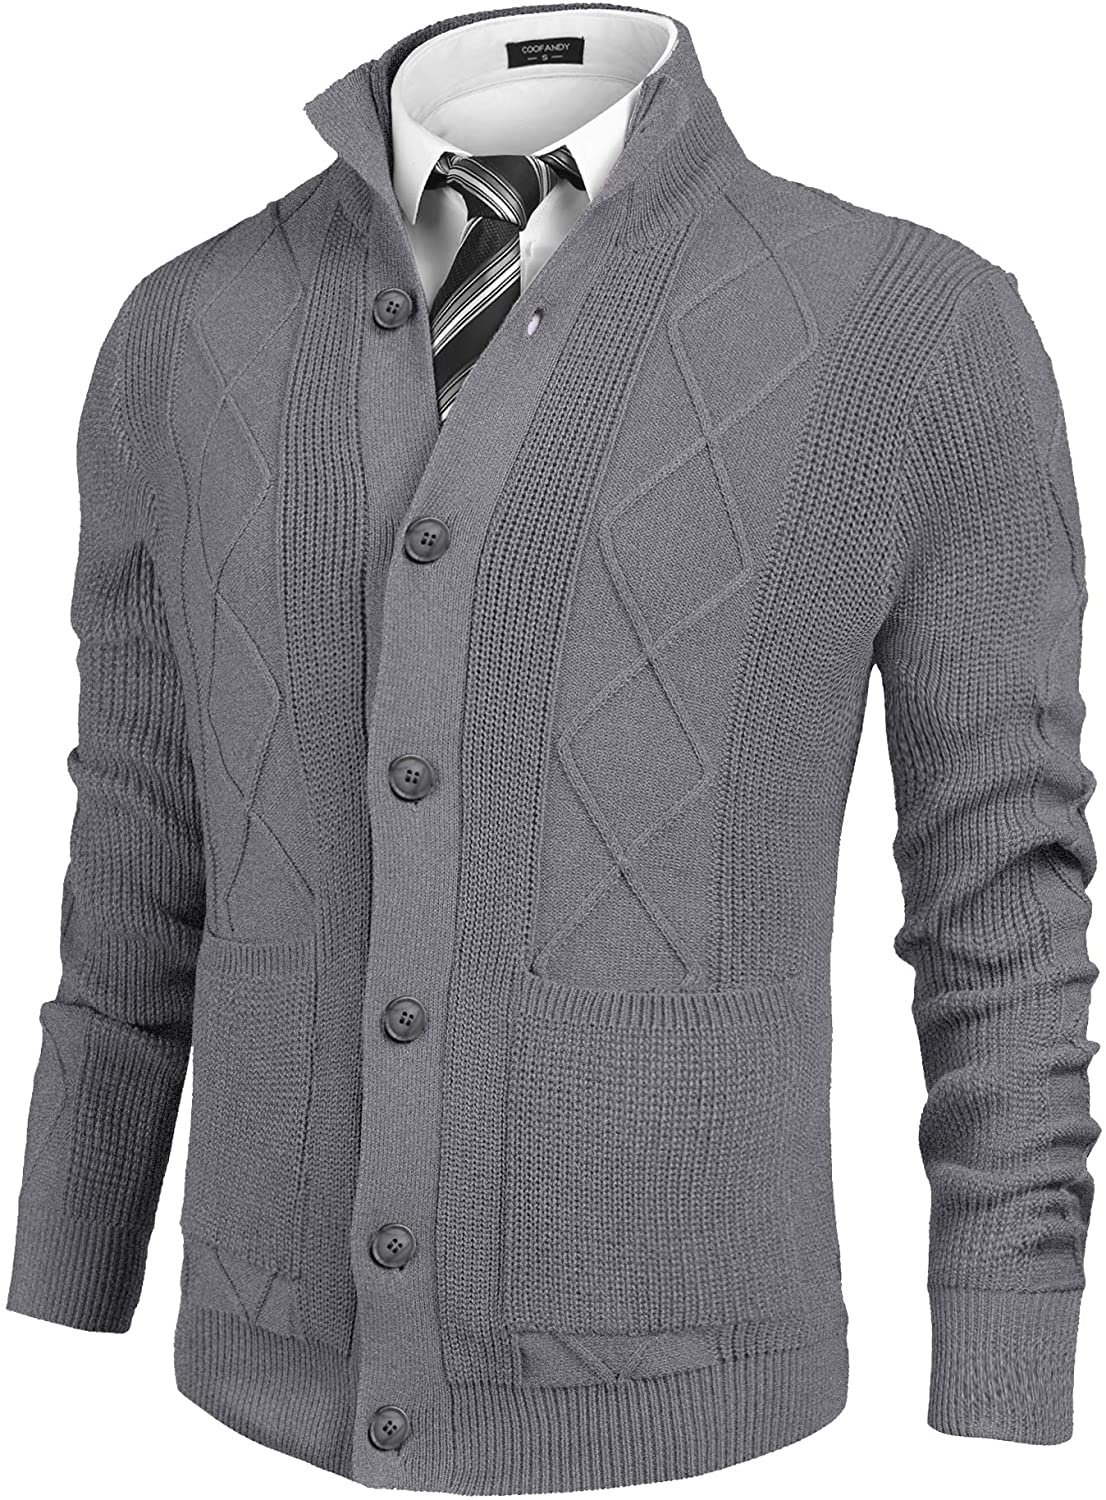 COOFANDY Men's Knitted Cardigan Sweaters Stand Collar Button Down ...